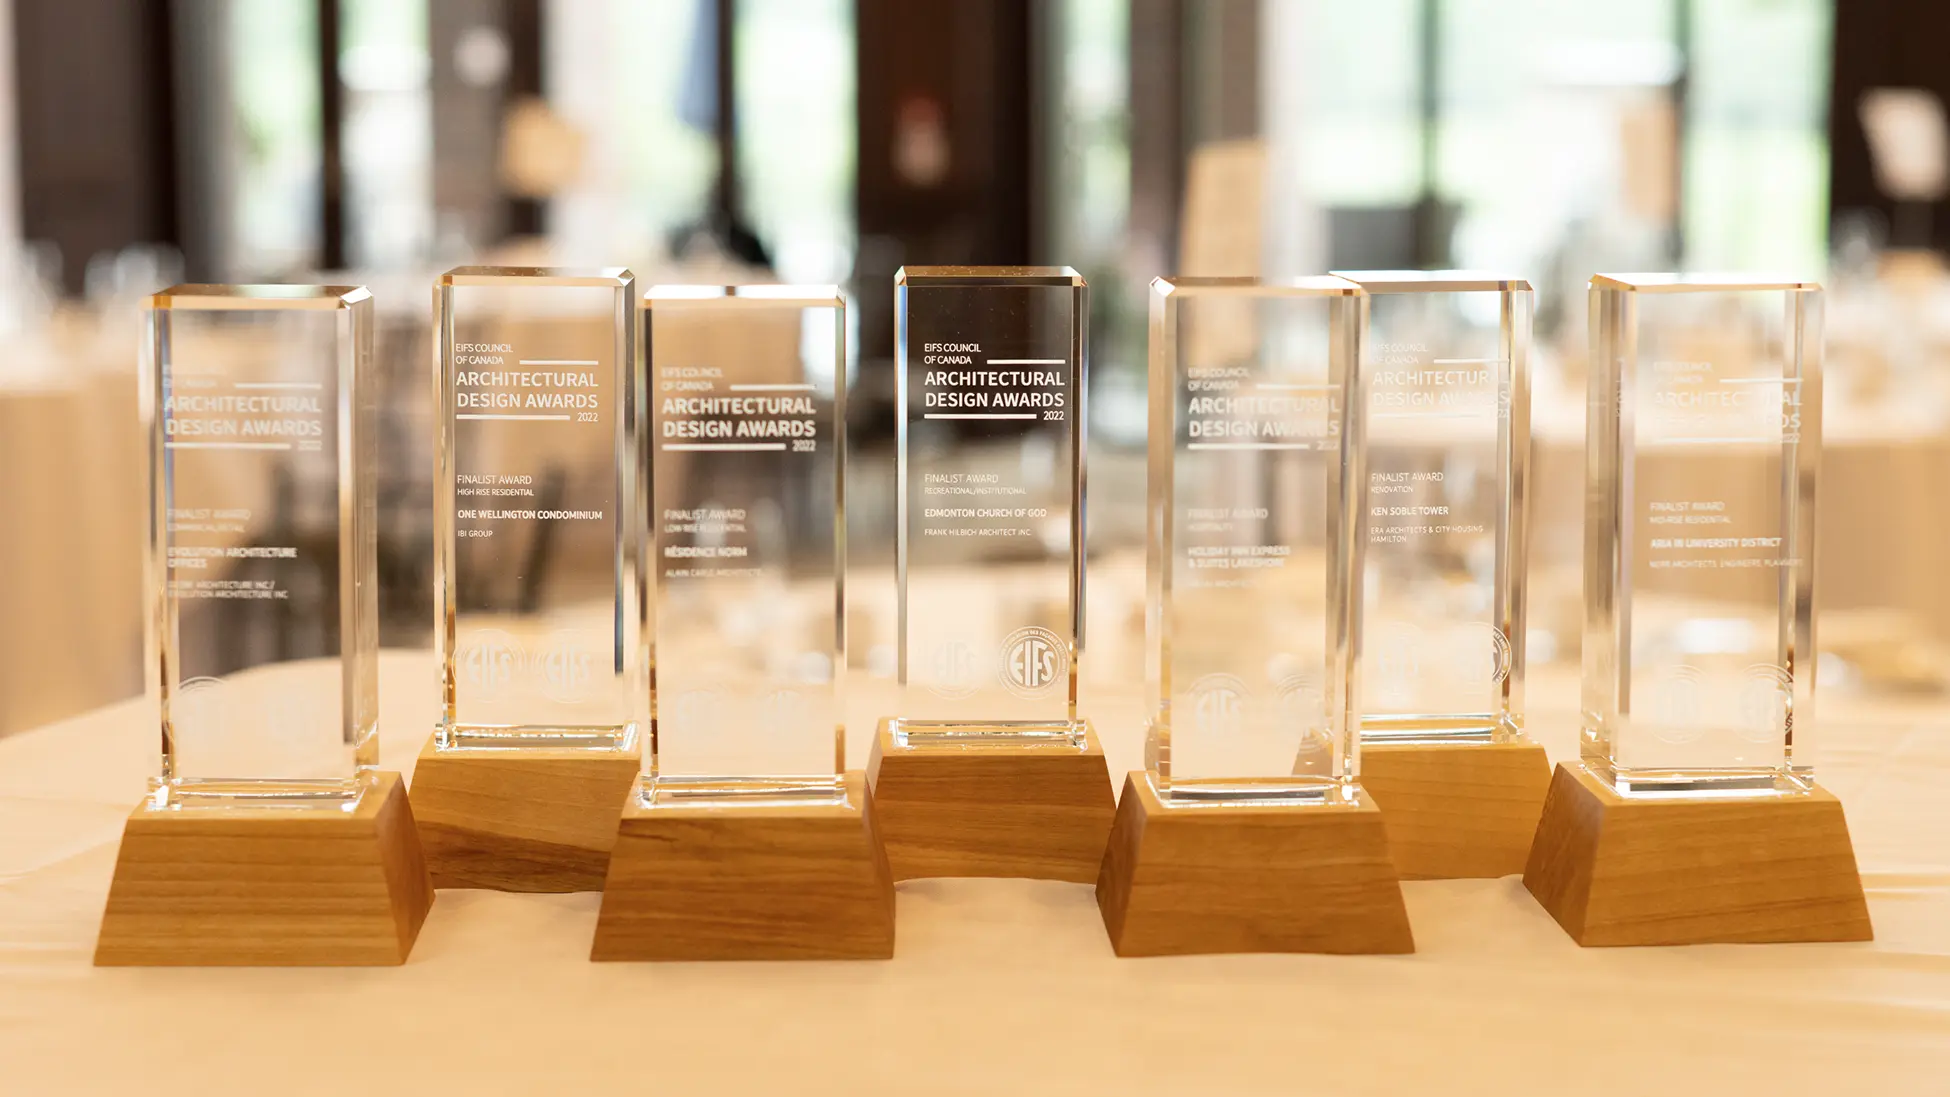 Picture of Architectural Design Awards trophies for finalists | EIFS Council of Canada